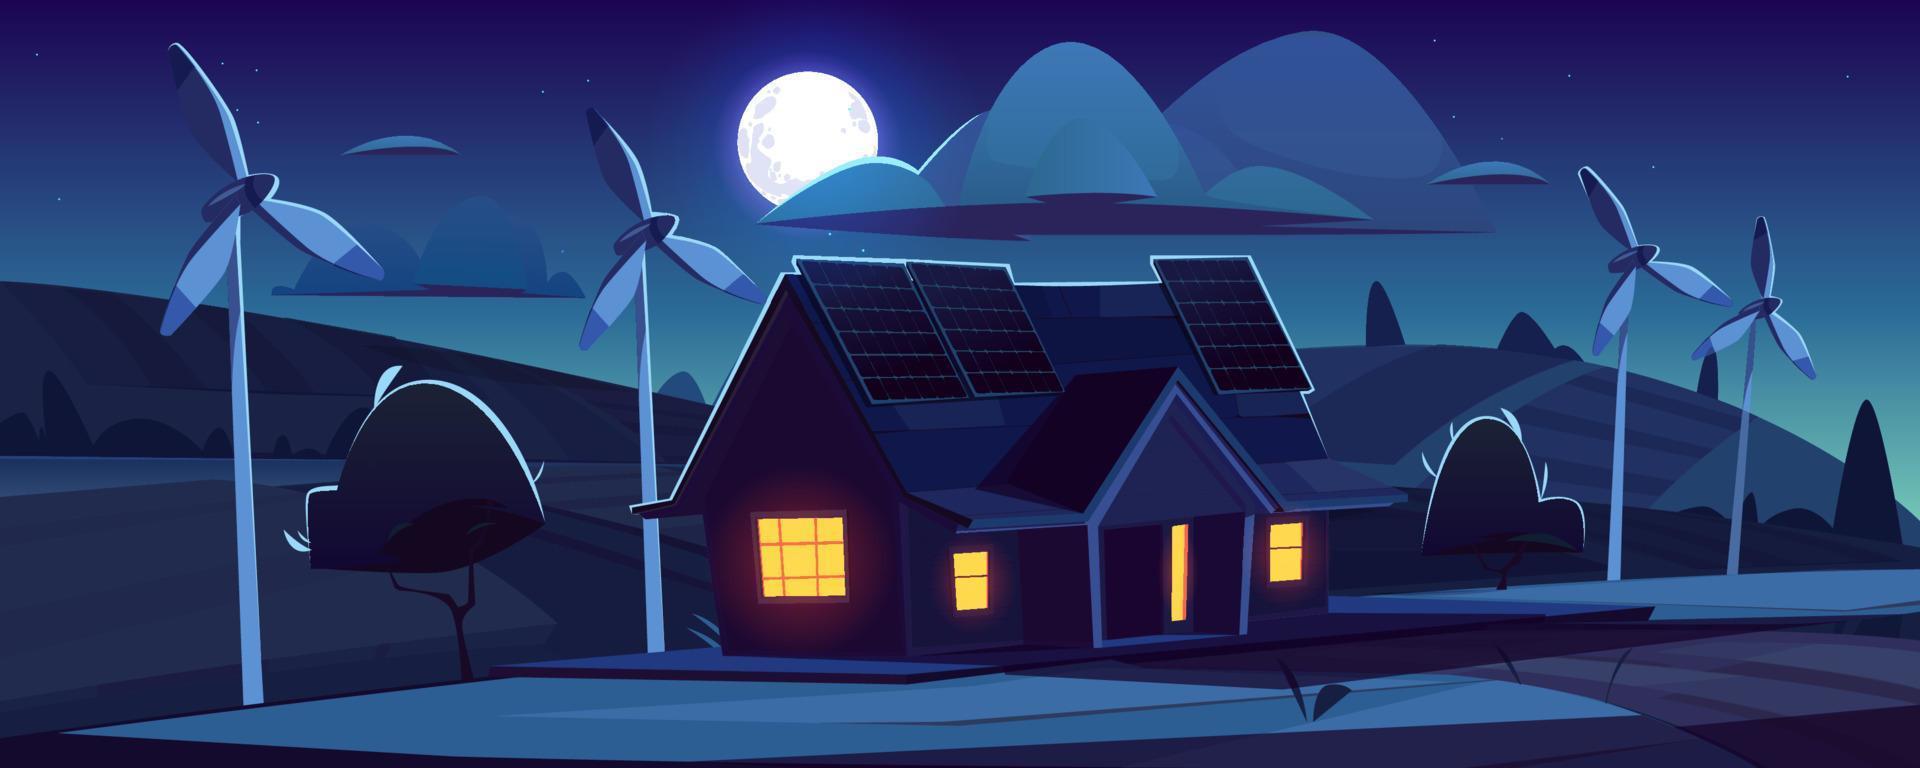 House with solar panels and wind turbines at night vector